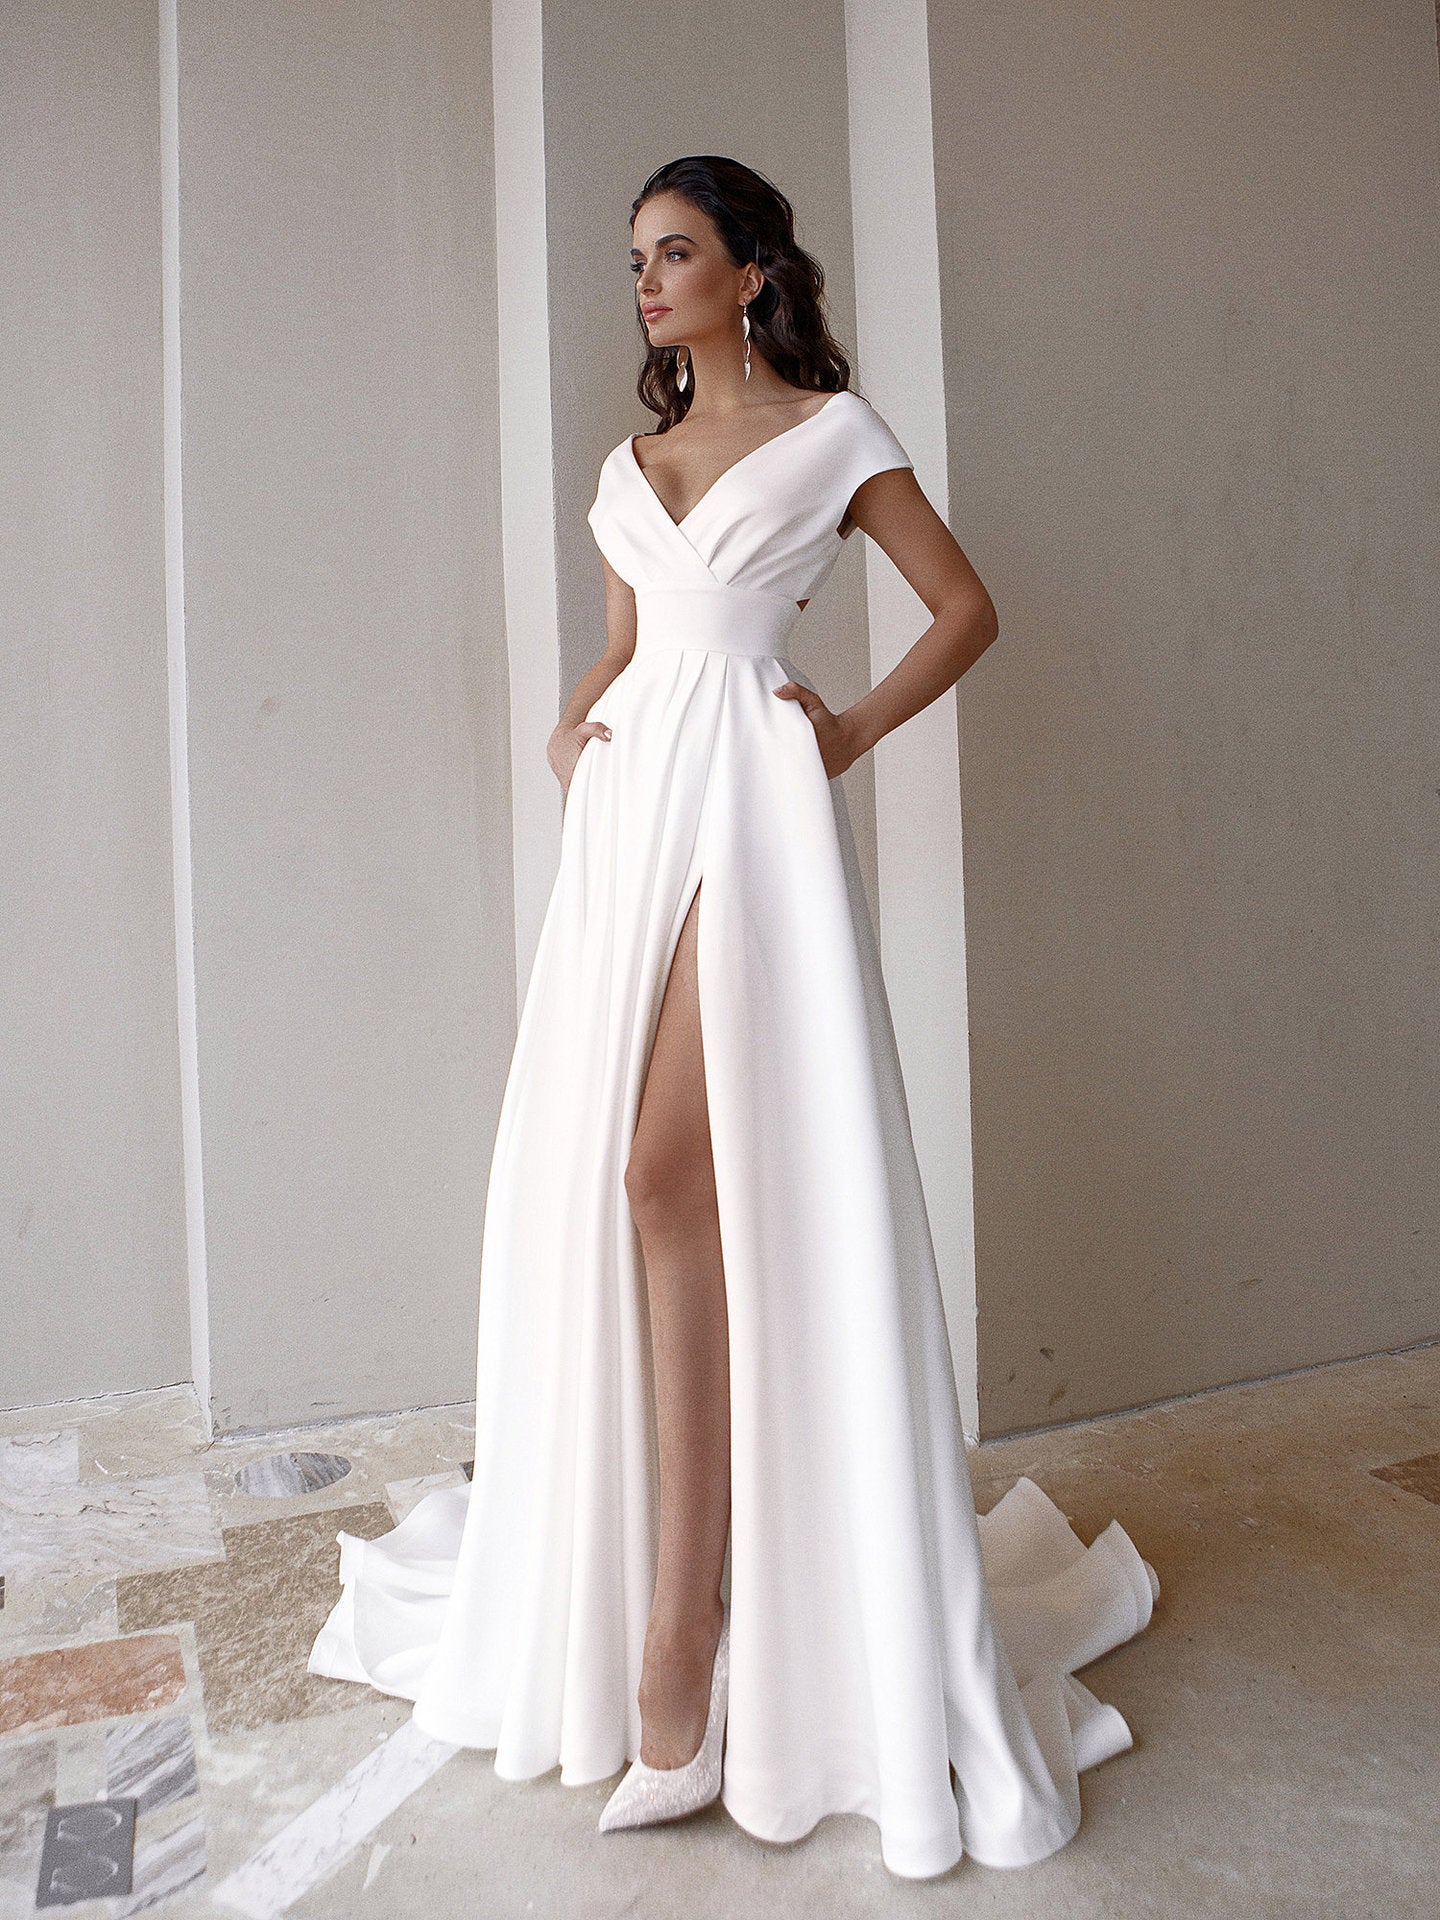 Chest Wrapped Ruffled White Medium Waist Solid Color Maxi Dress